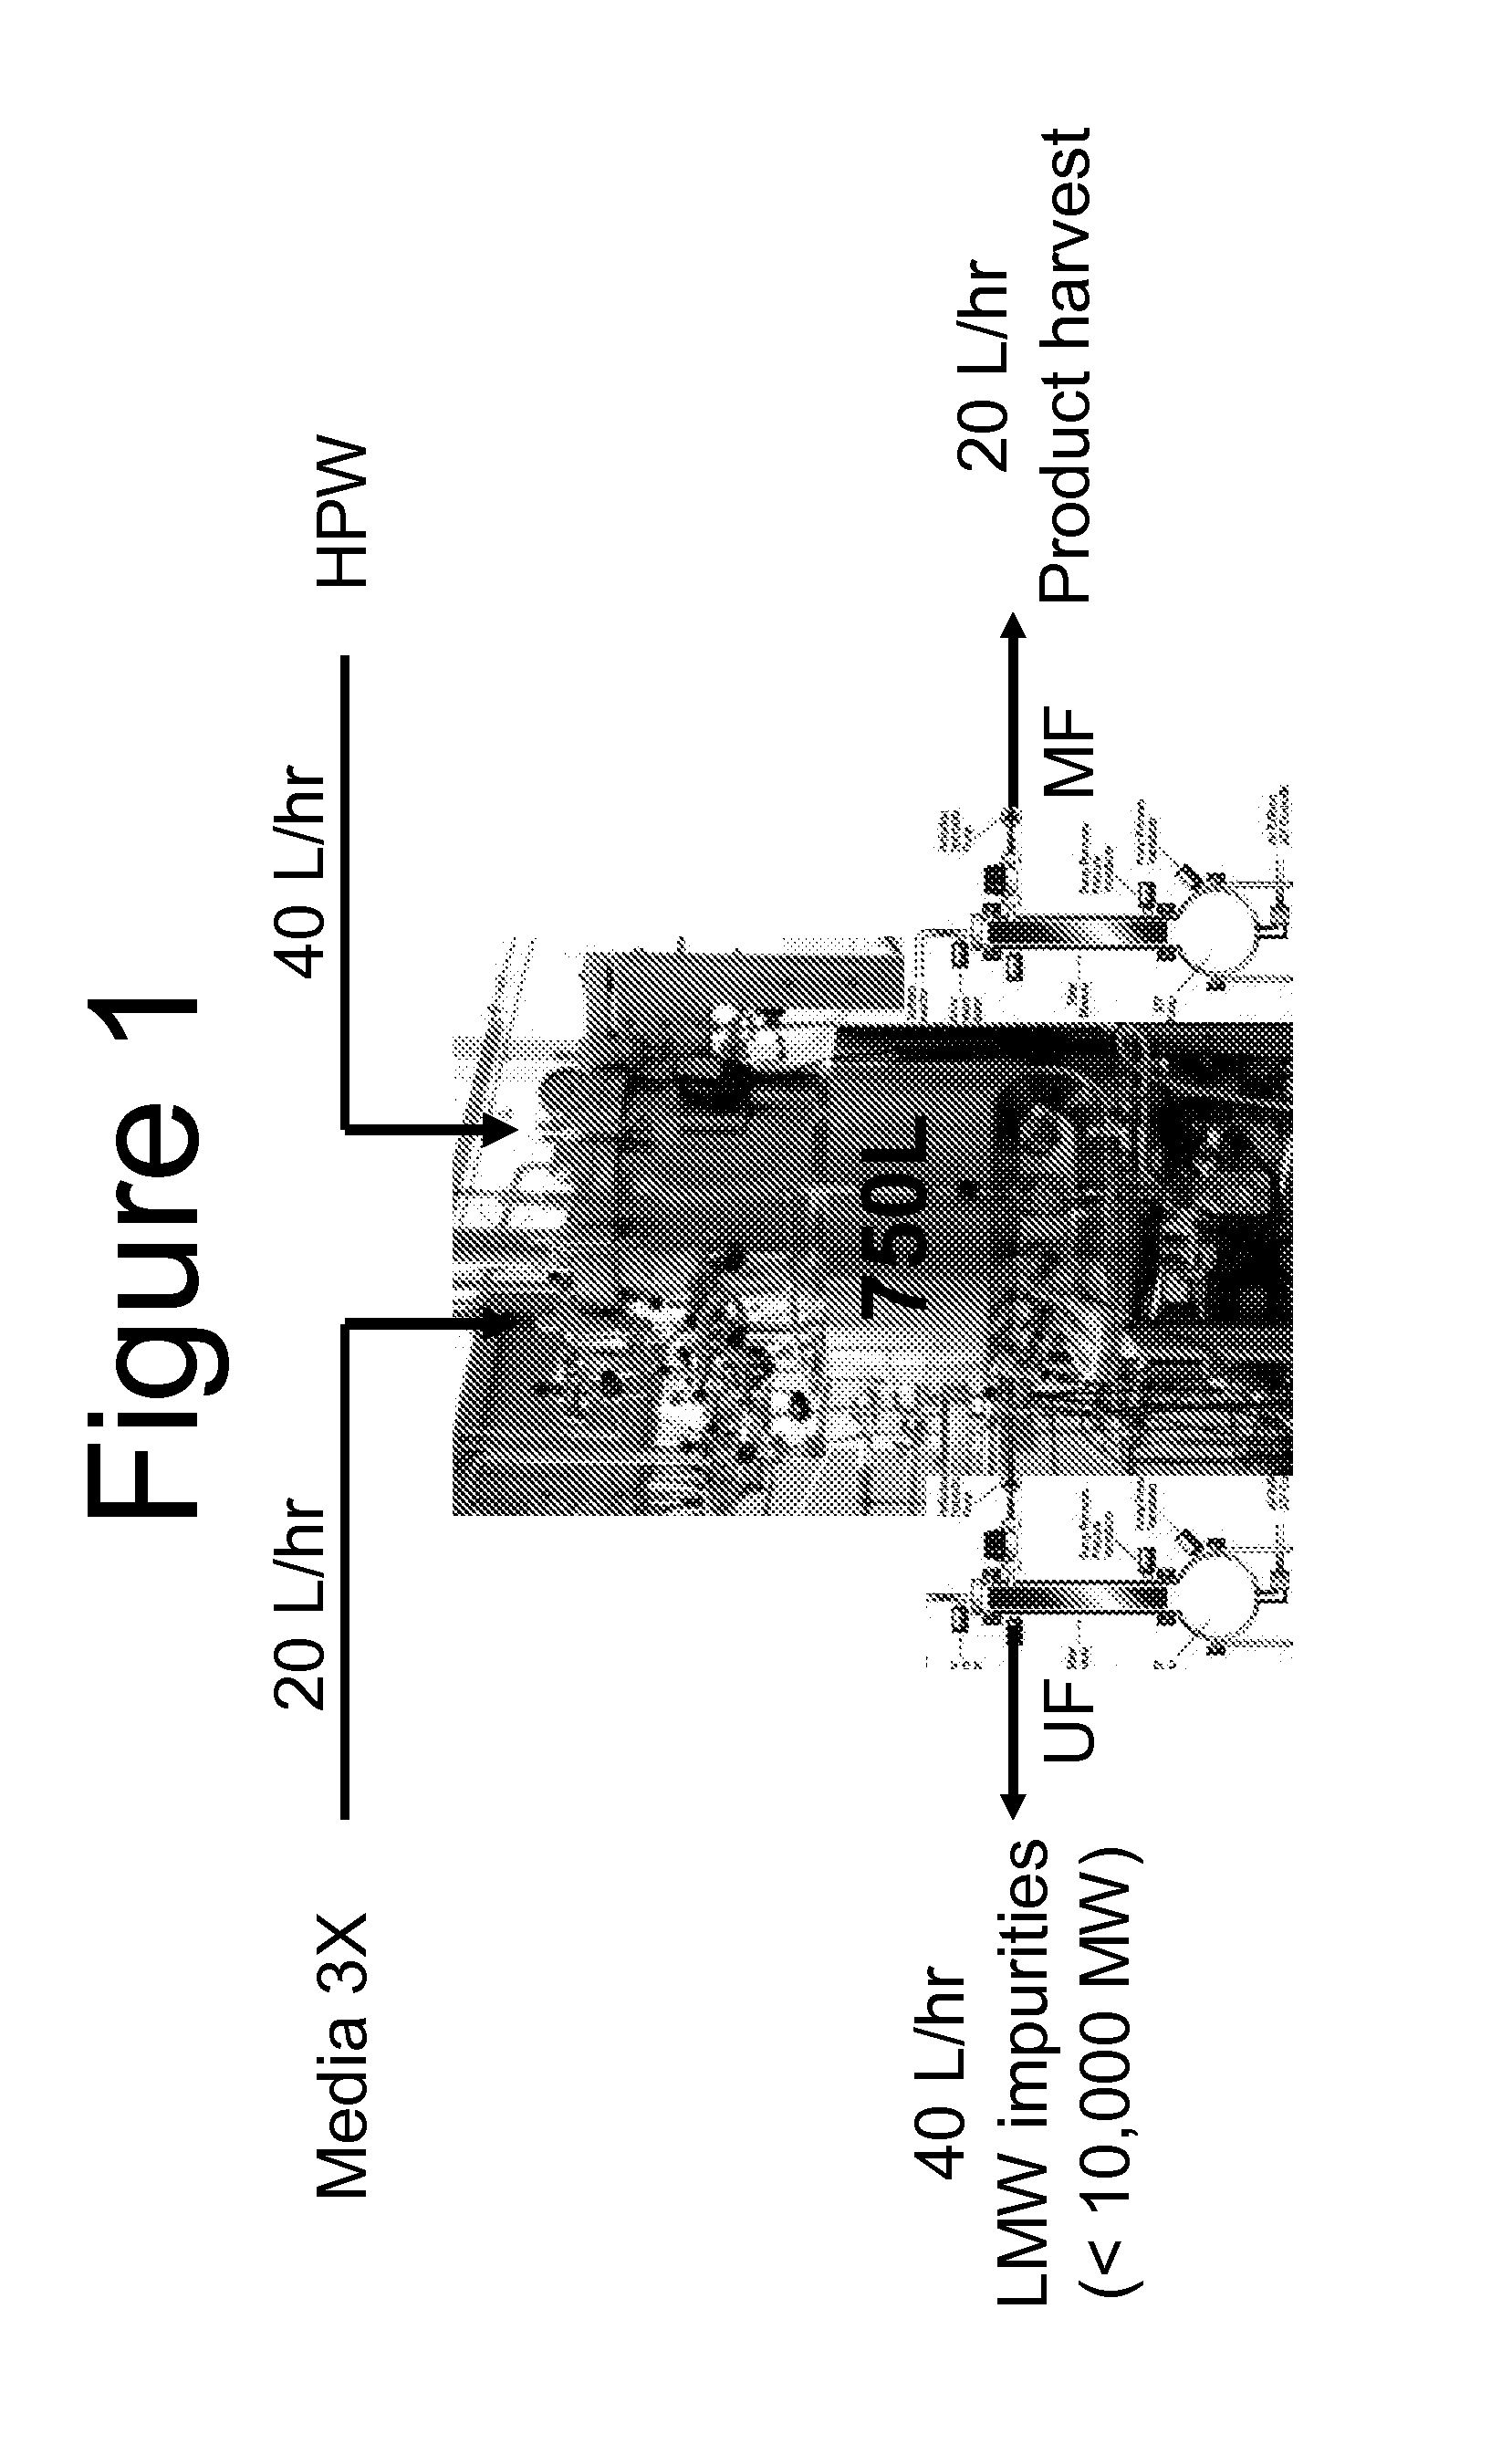 Method For Producing a Biopolymer (e.g. polypeptide) In A Continuous Fermentation Process